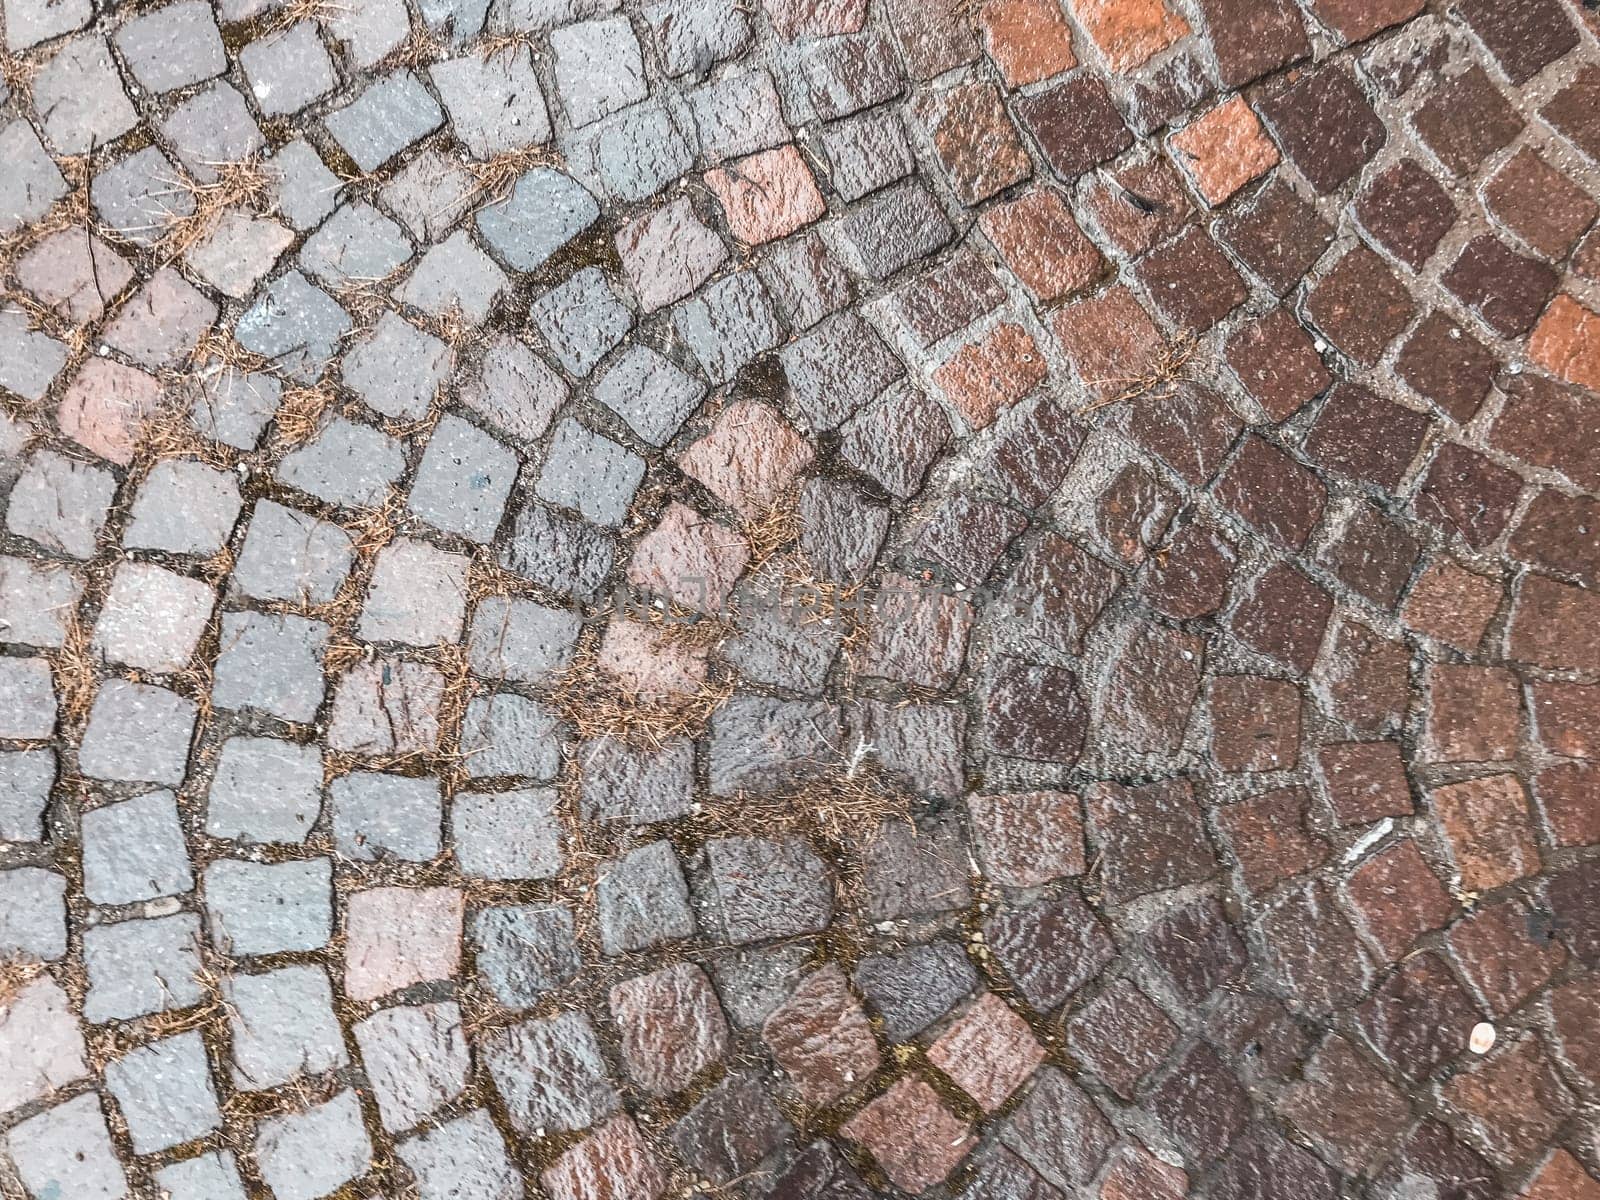 A brick walkway with a wet surface. The bricks are brown and gray